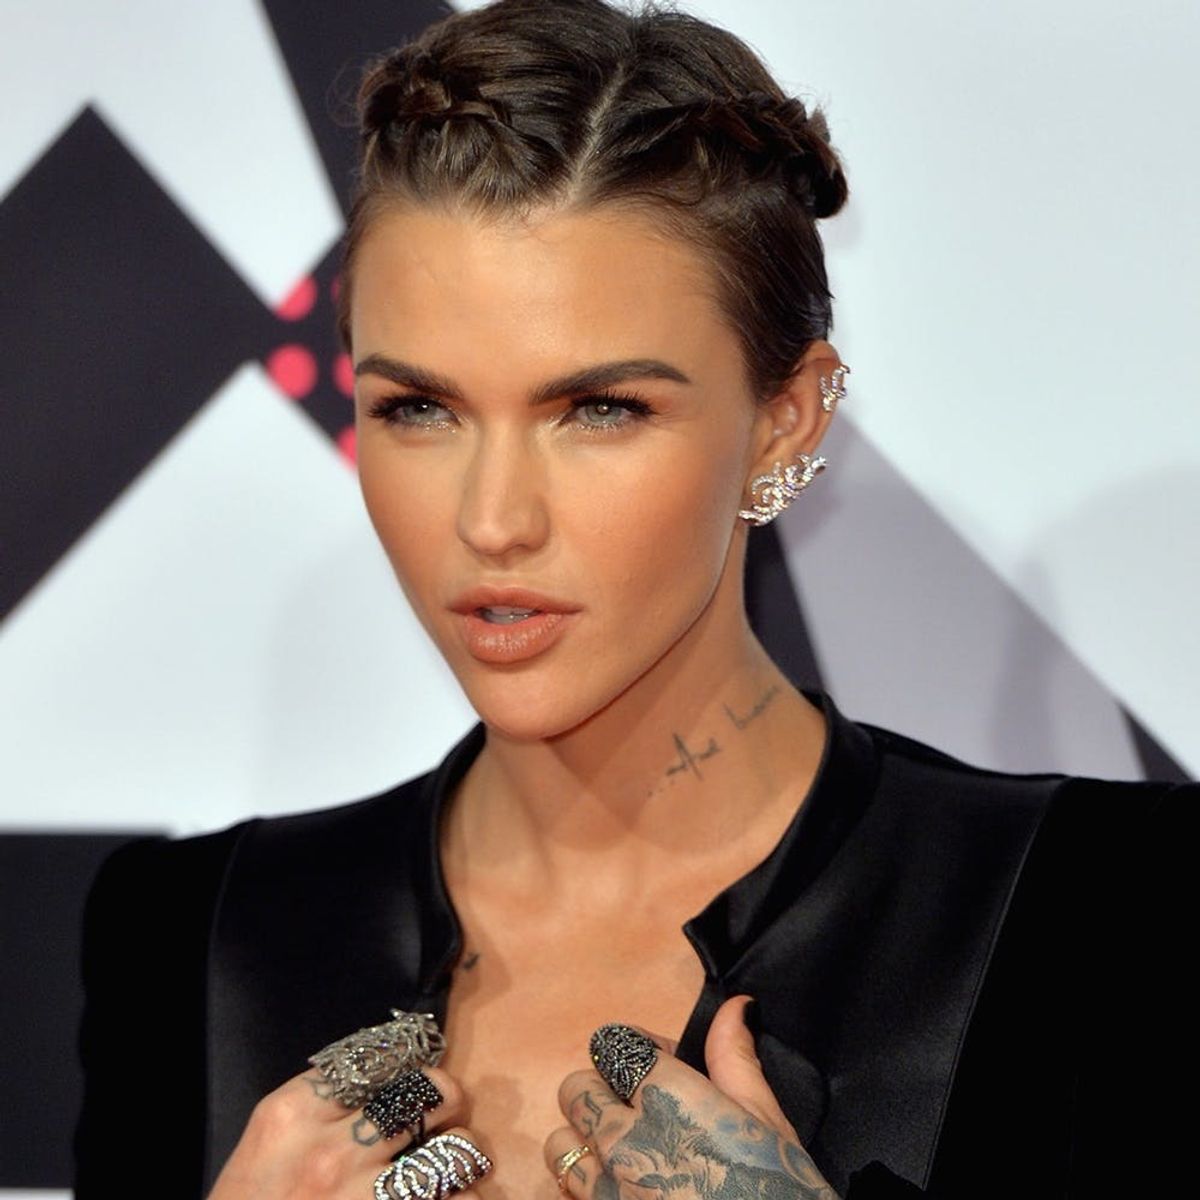 Ruby Rose Showed Us the Perfect Fancy Hairstyle for Short Hair